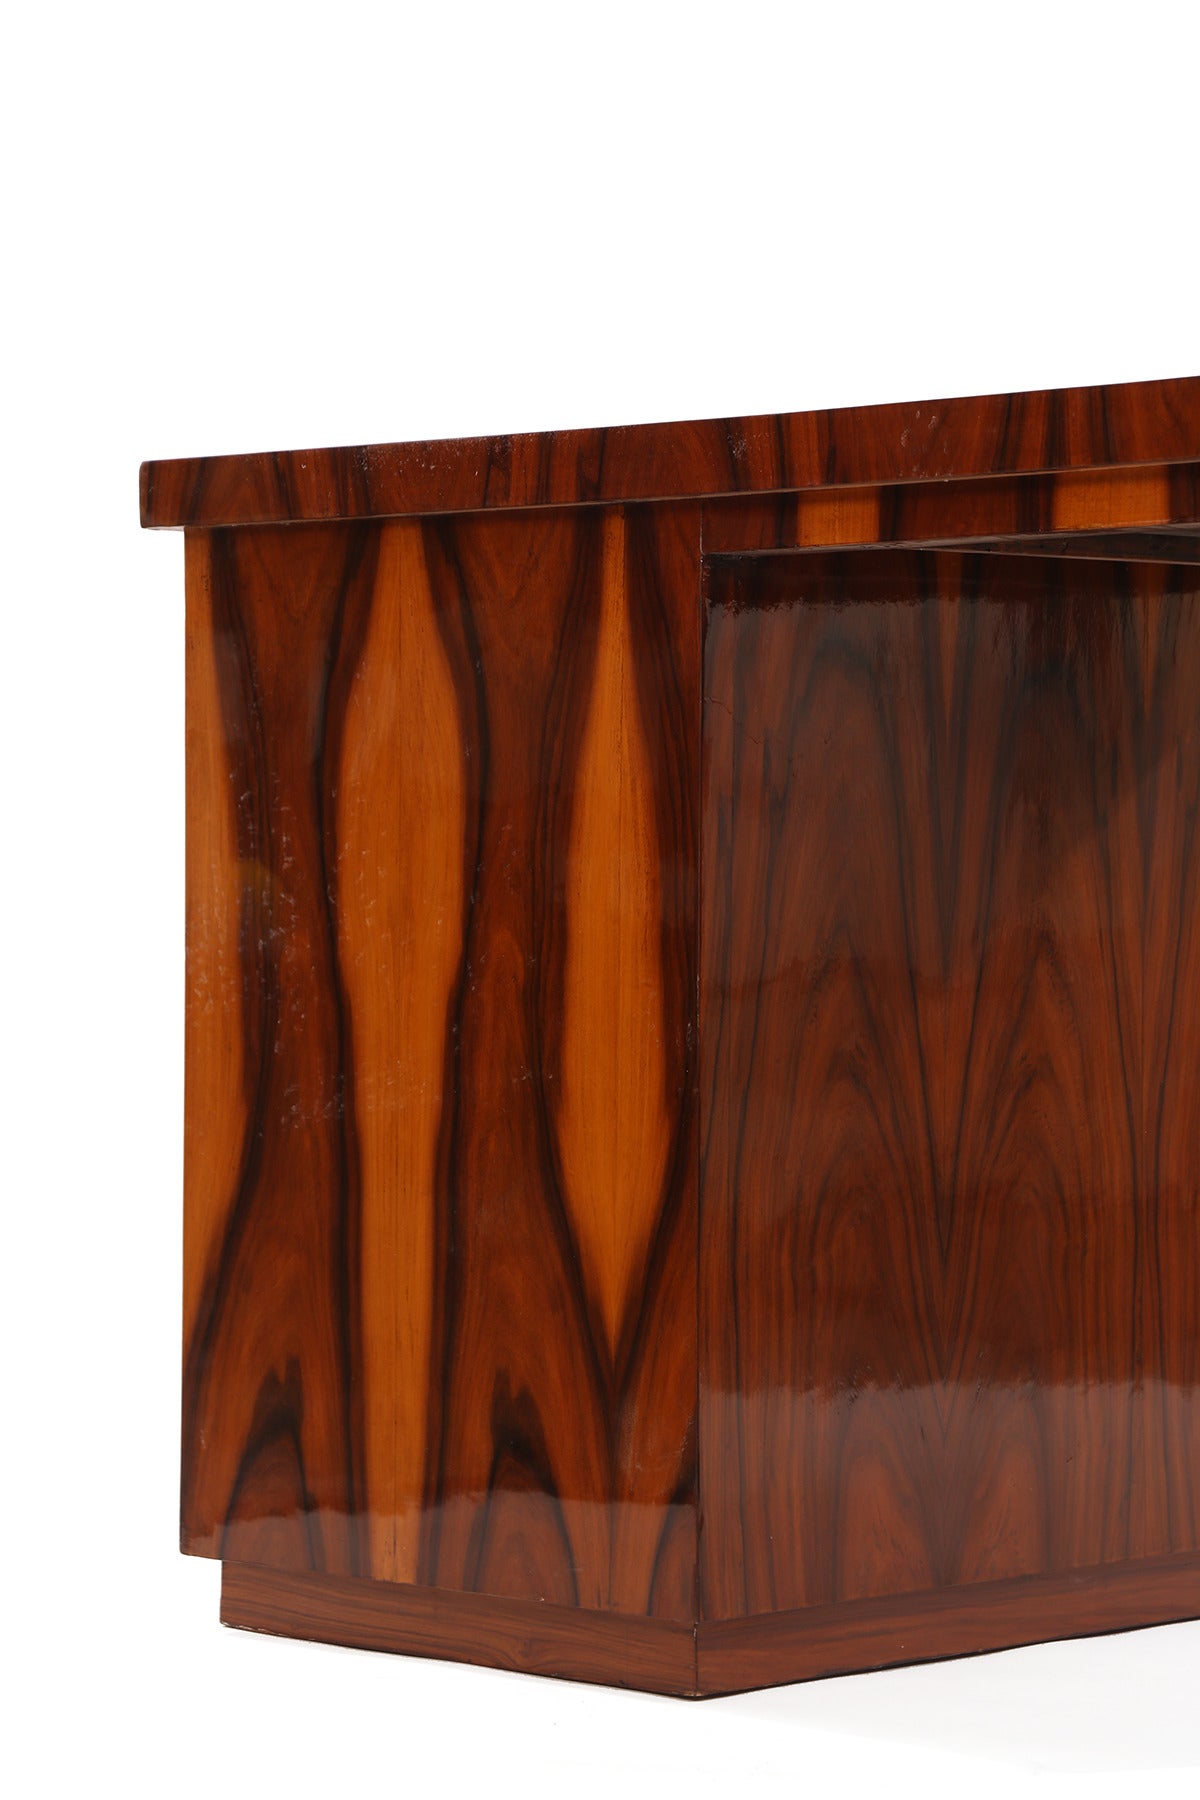 Flame Grained Rosewood Art Deco Desk 2